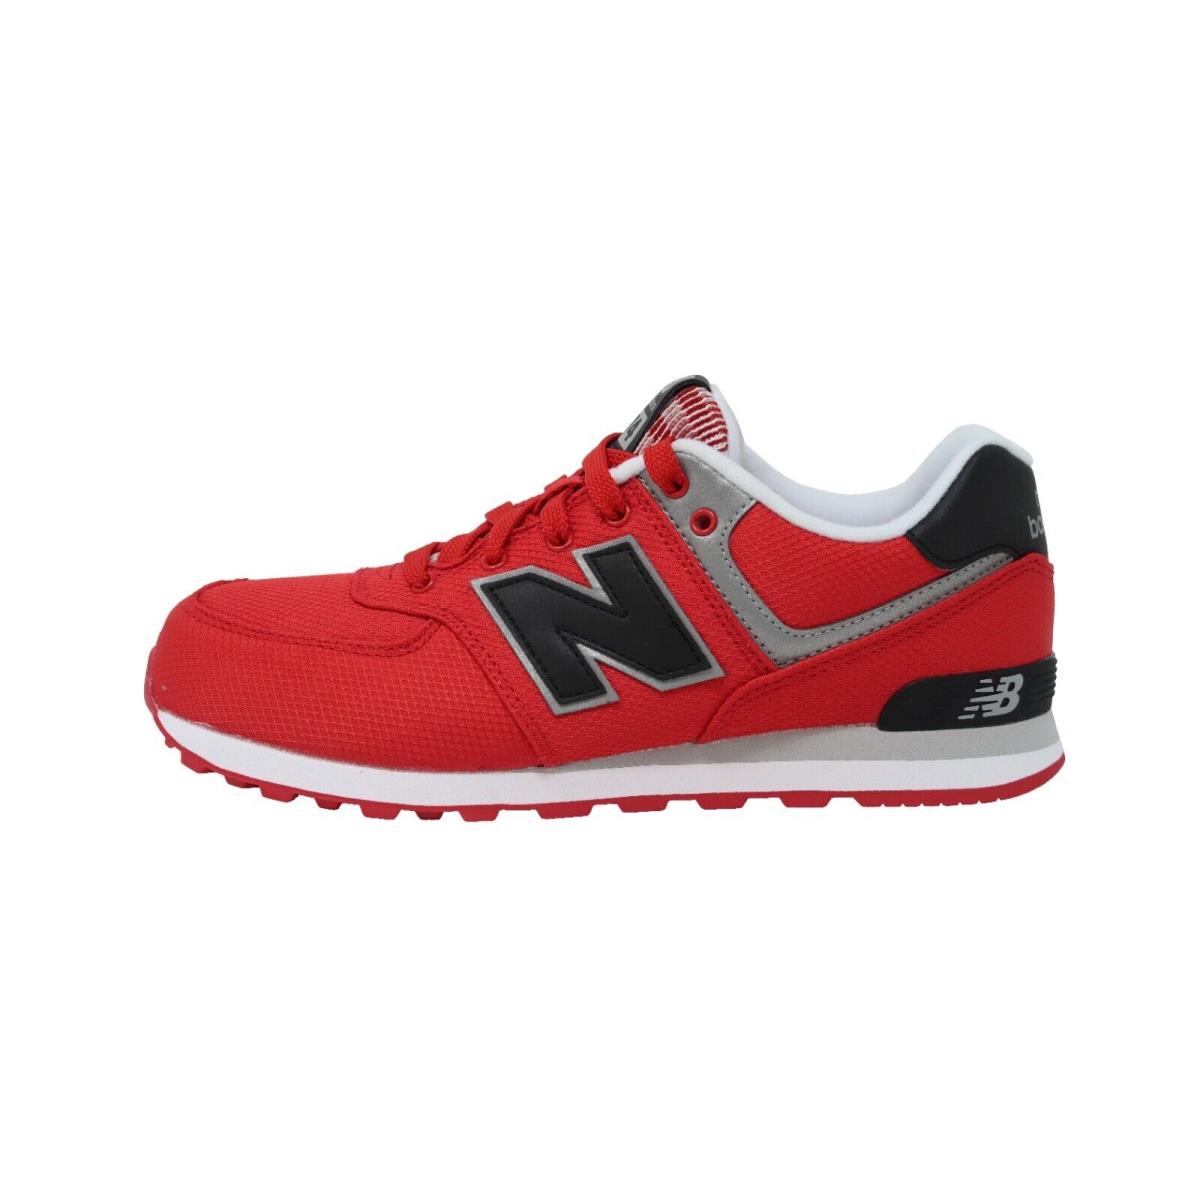 New Balance 574 Big Kids Running Shoes Sneakers KL574F5G - Red/black